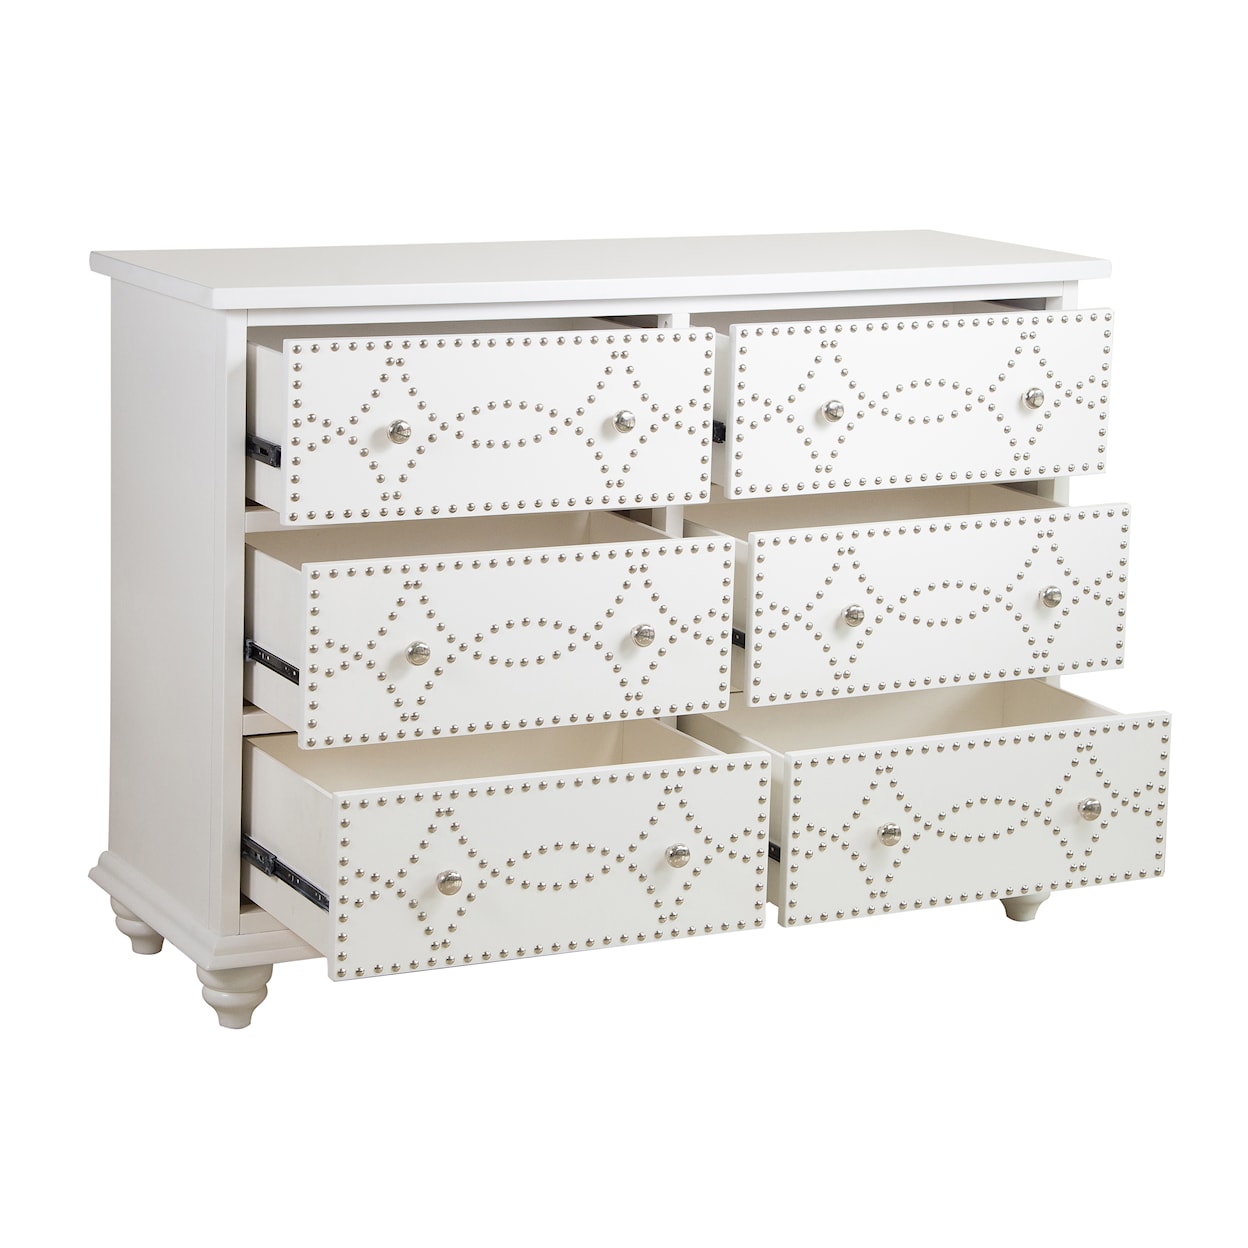 Accentrics Home Accents Chests & Cabinets